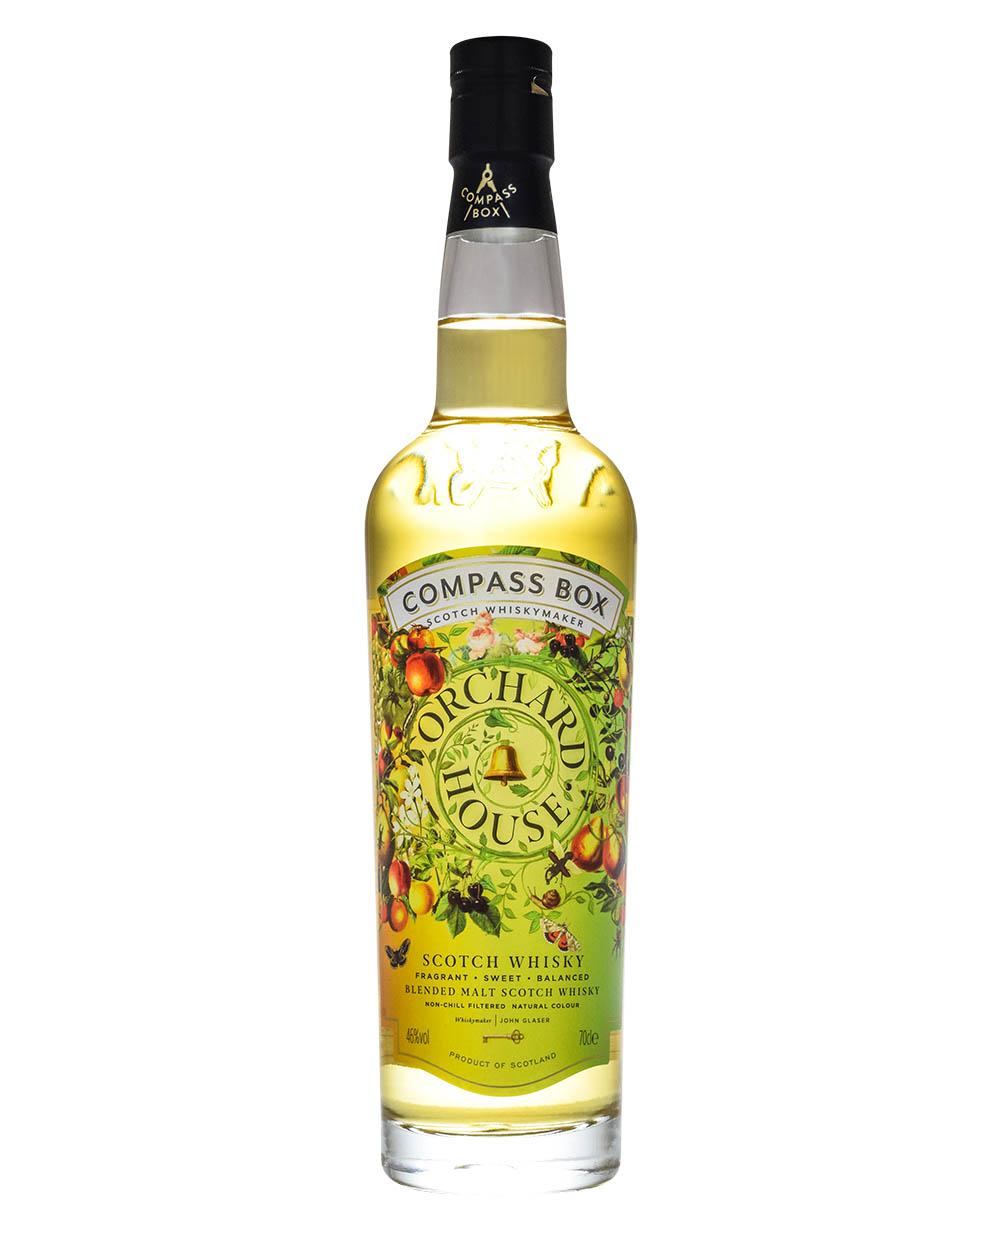 Compass Box Orchard House Musthave Malts MHM